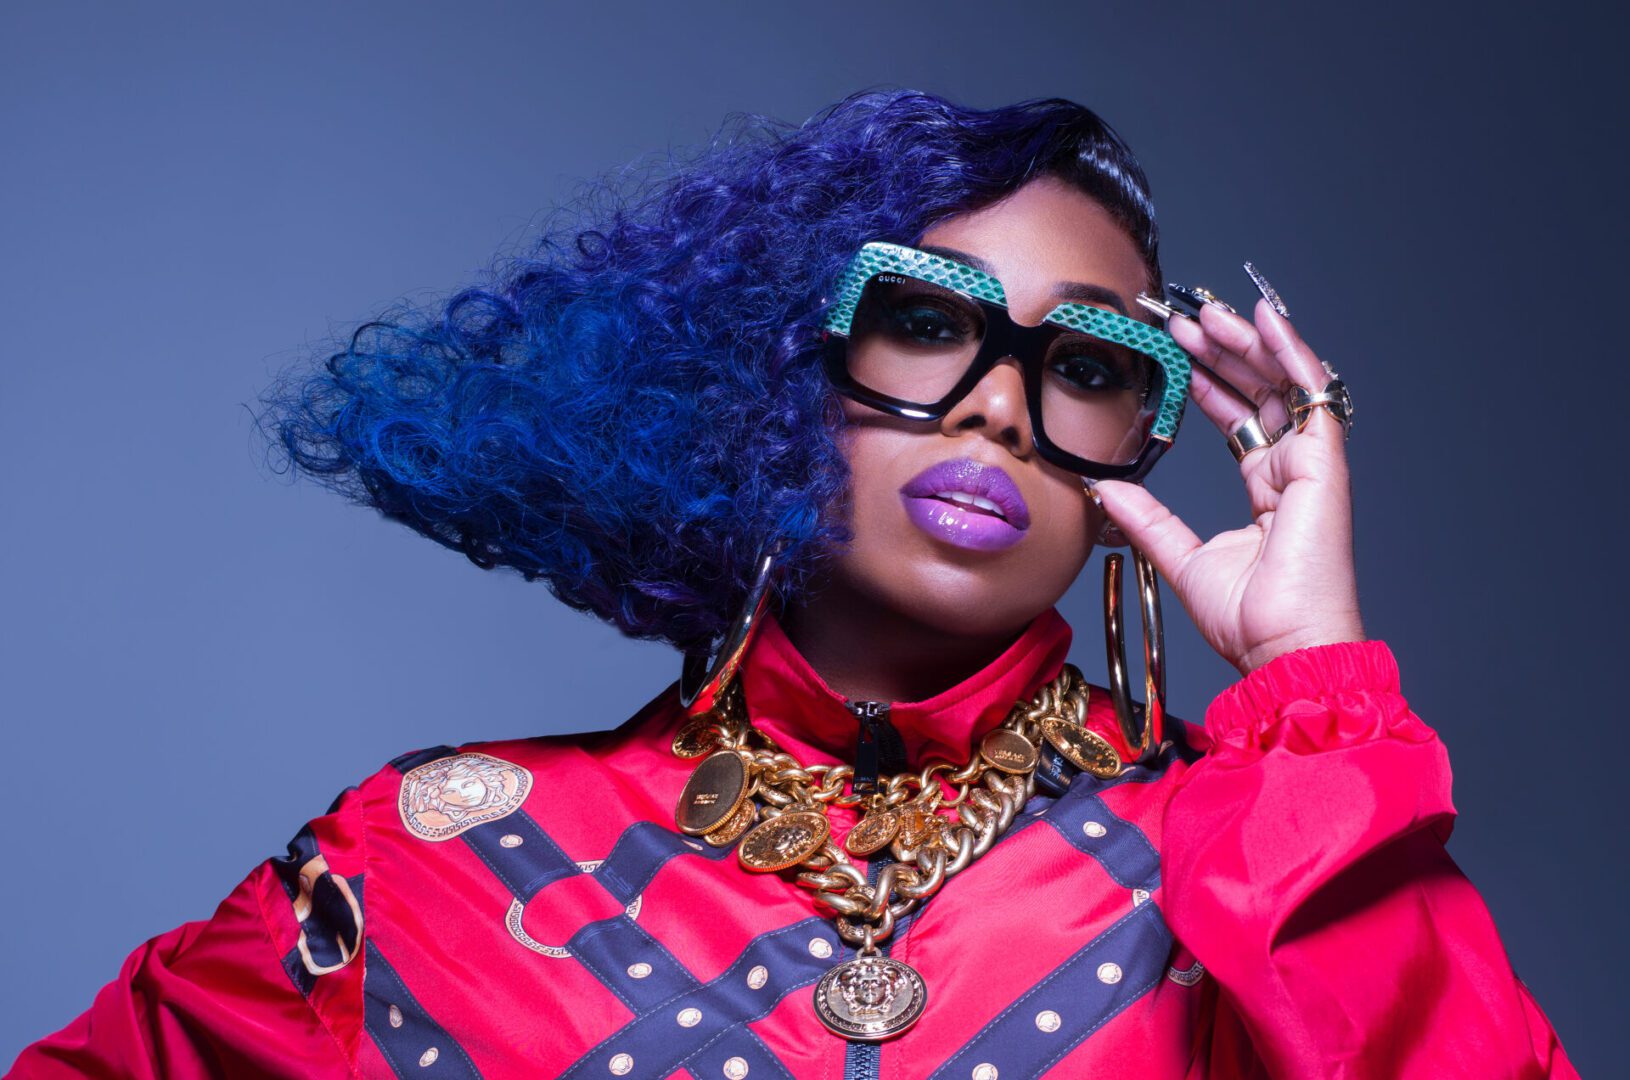 Missy Elliot Enters the Rock & Roll Hall of Fame